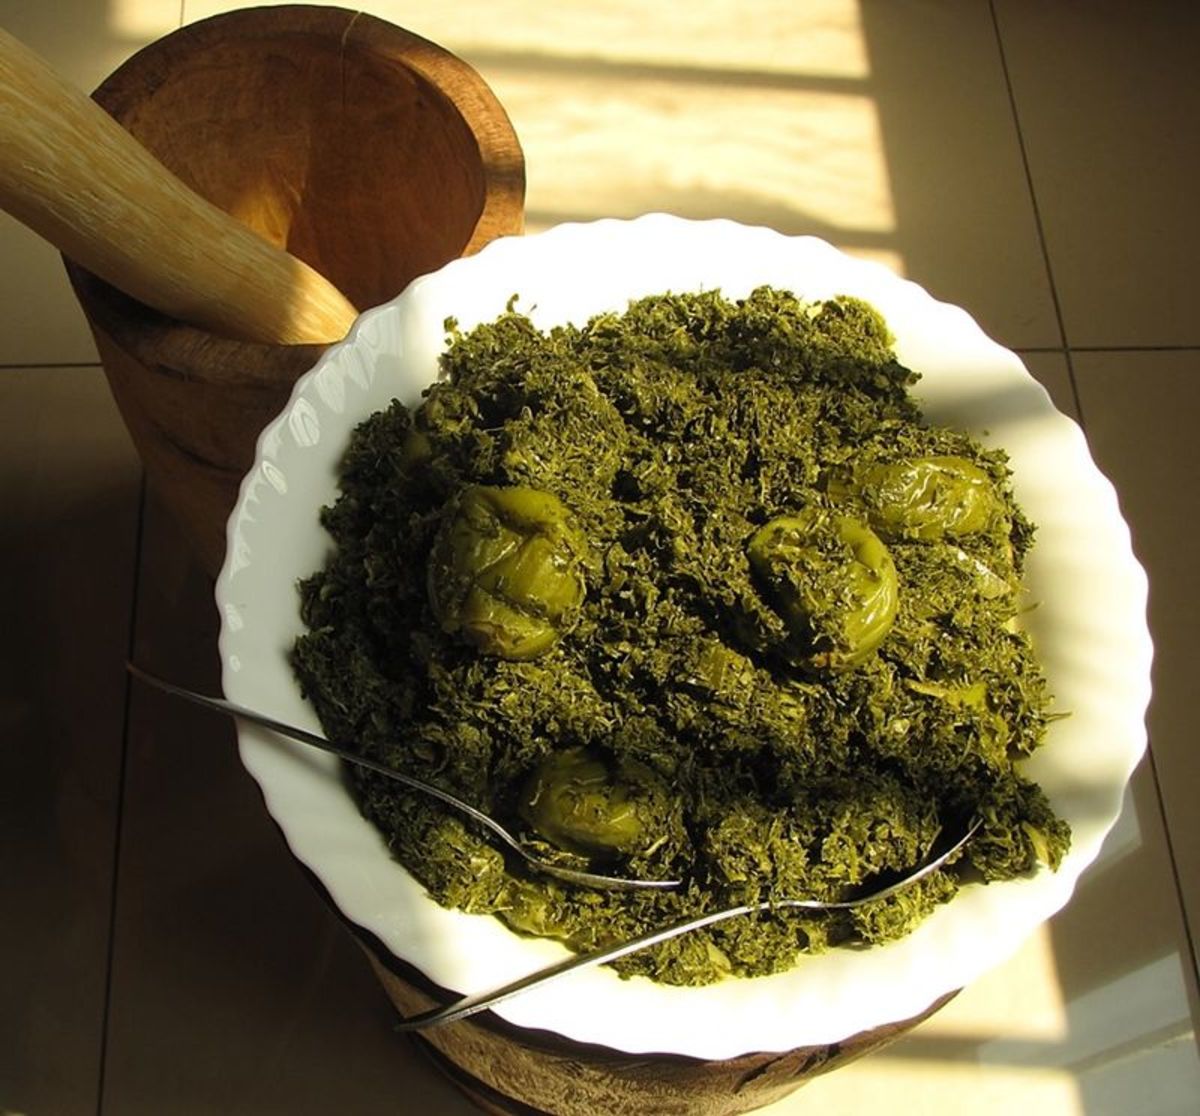 An African dish called saka saka that is made with unripe pumpkin on a stick and pounded cassava leaves.